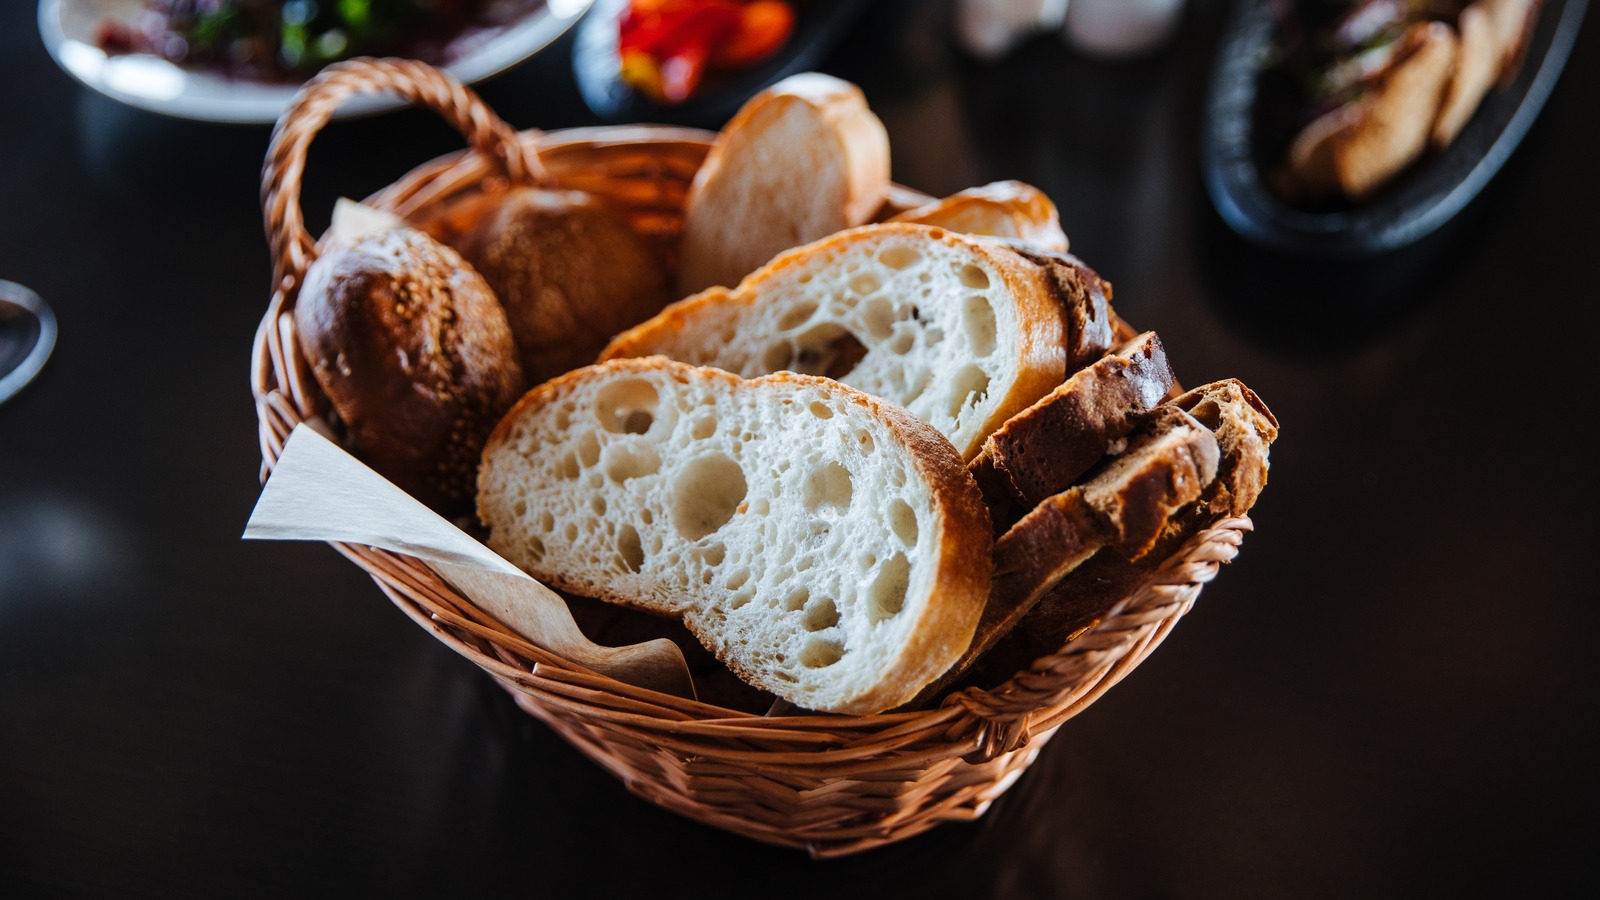 where-to-find-the-best-bread-service-from-coast-to-coast